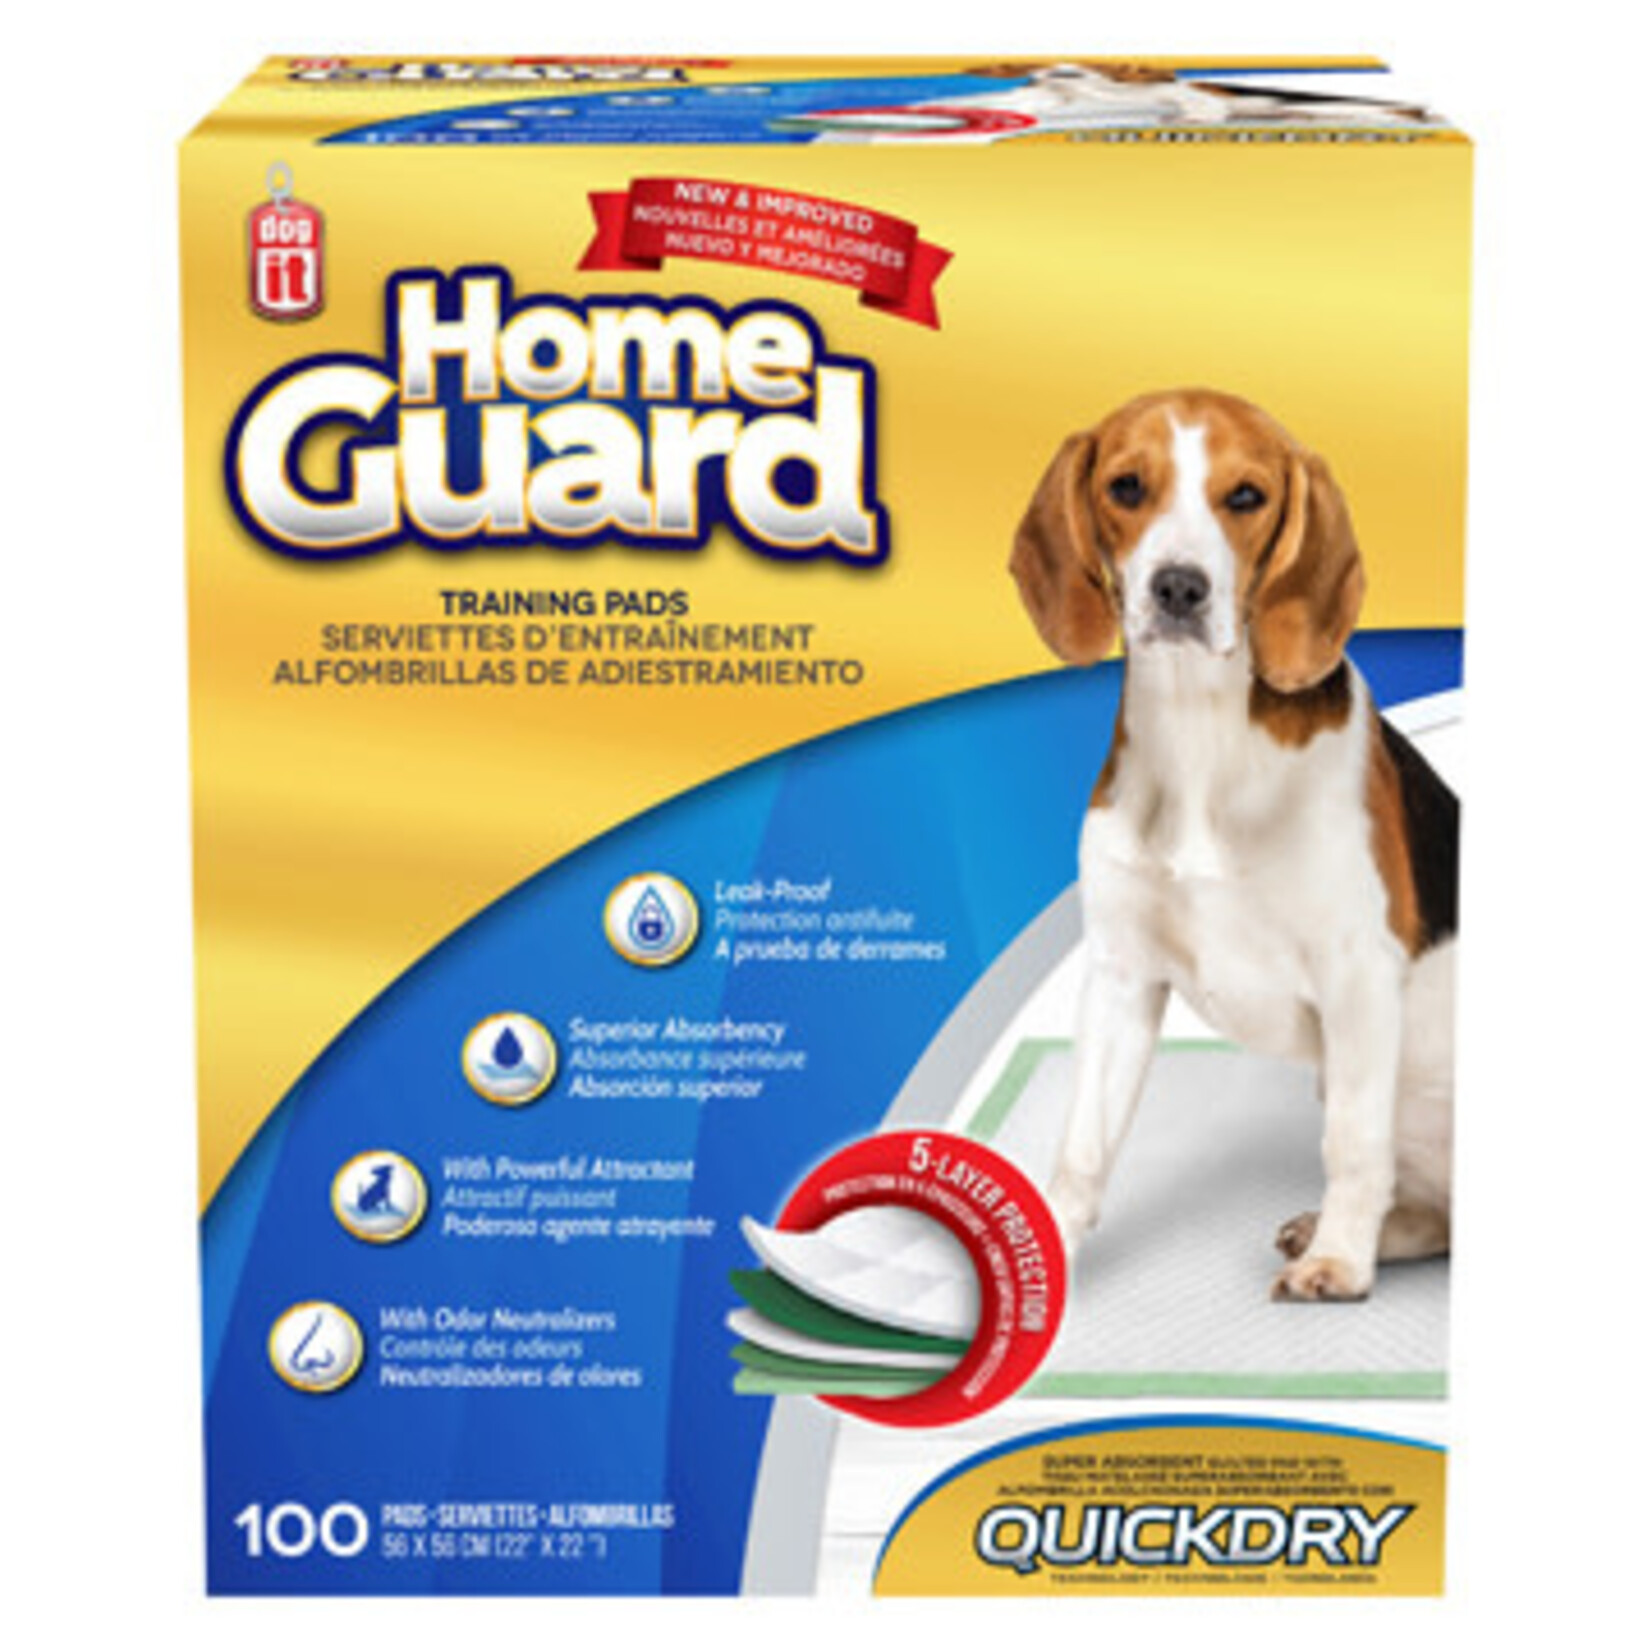 DogIt Dogit Home Guard Training Pads (56 x 56cm) - 100 pack